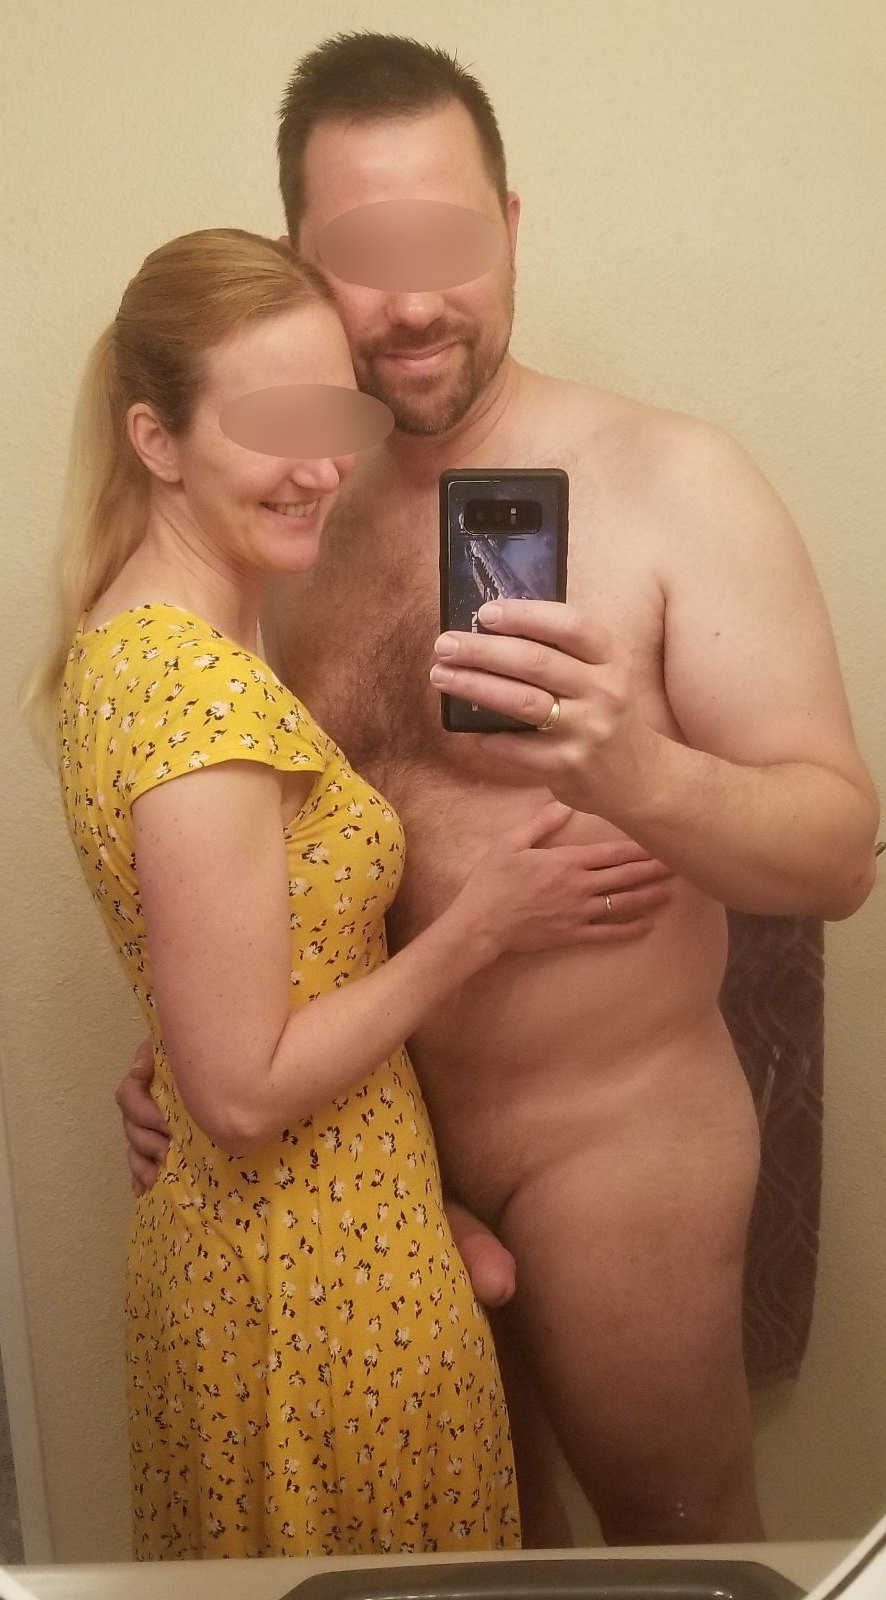 amateur porn, CFNM photo, wife with a naked photo